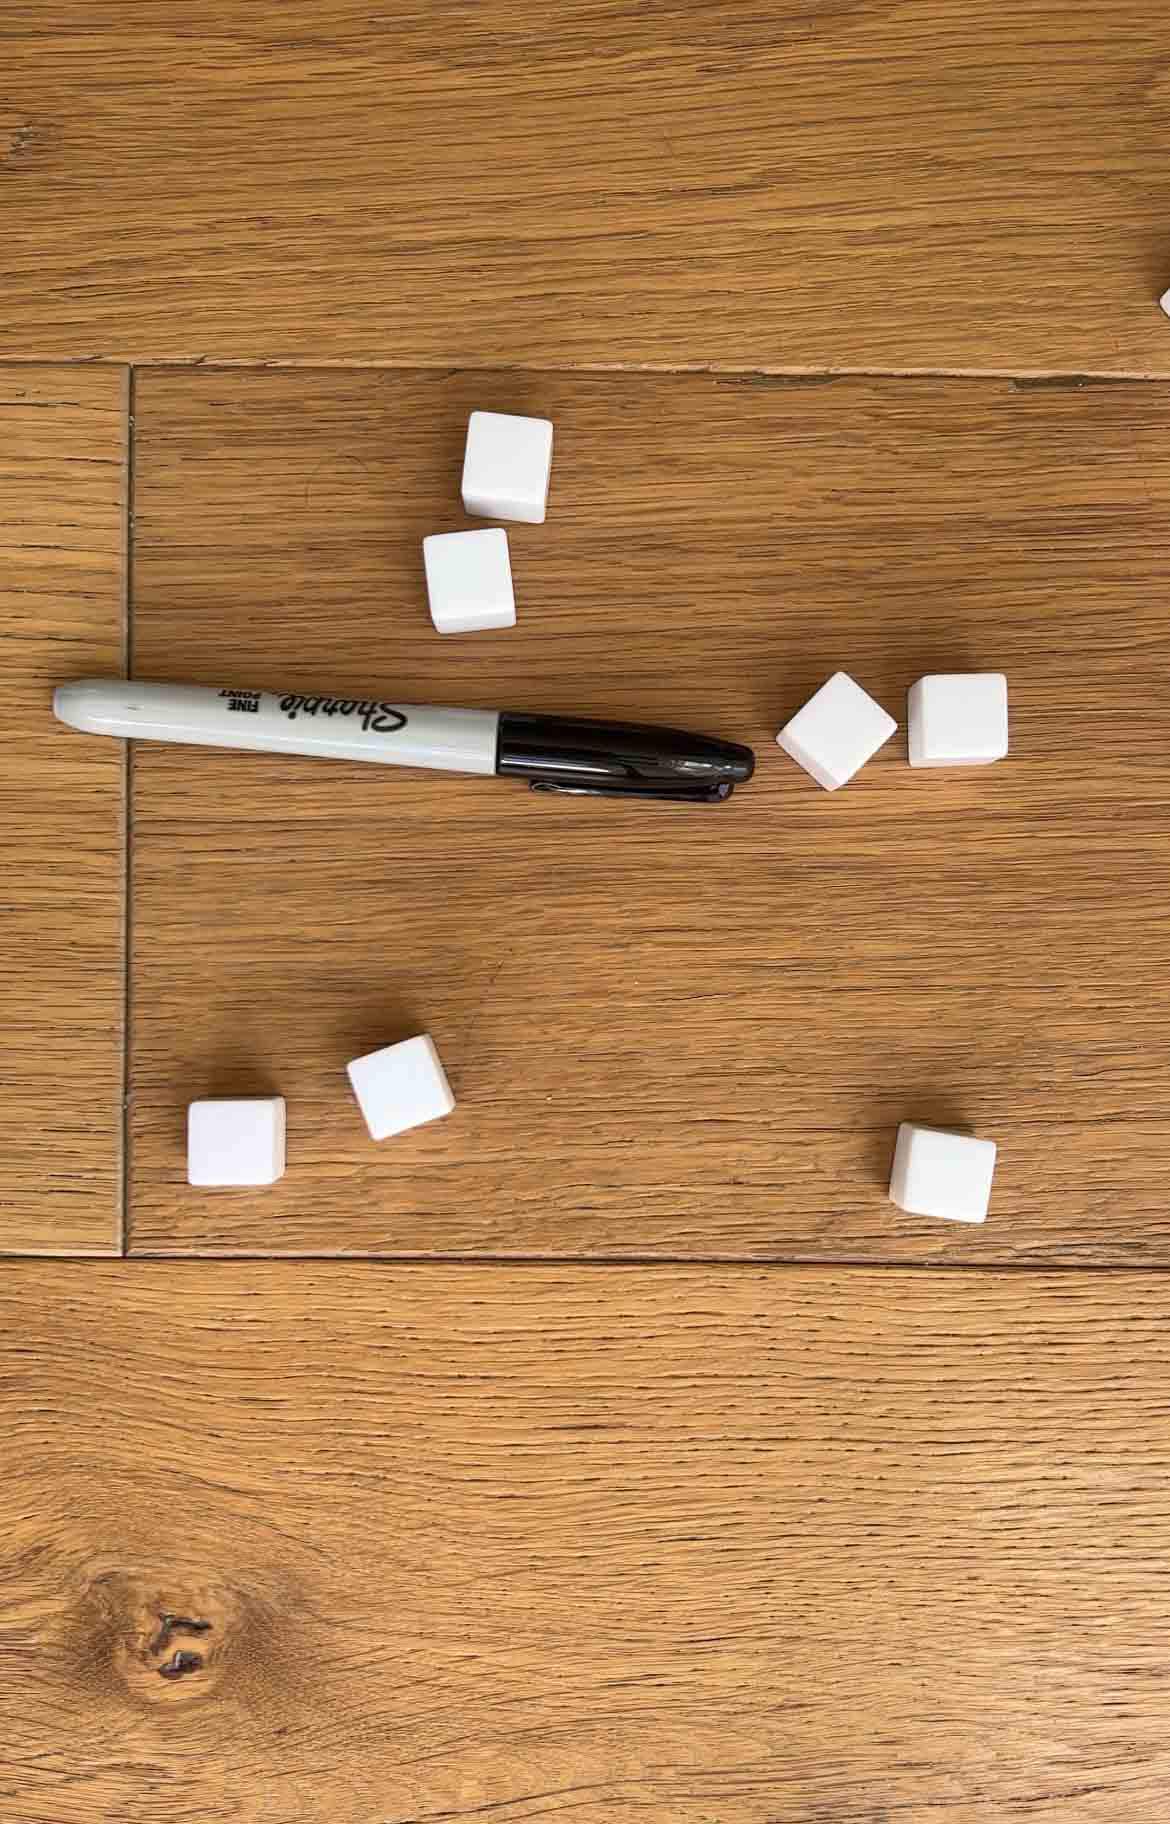 blank dice with a black Sharpie